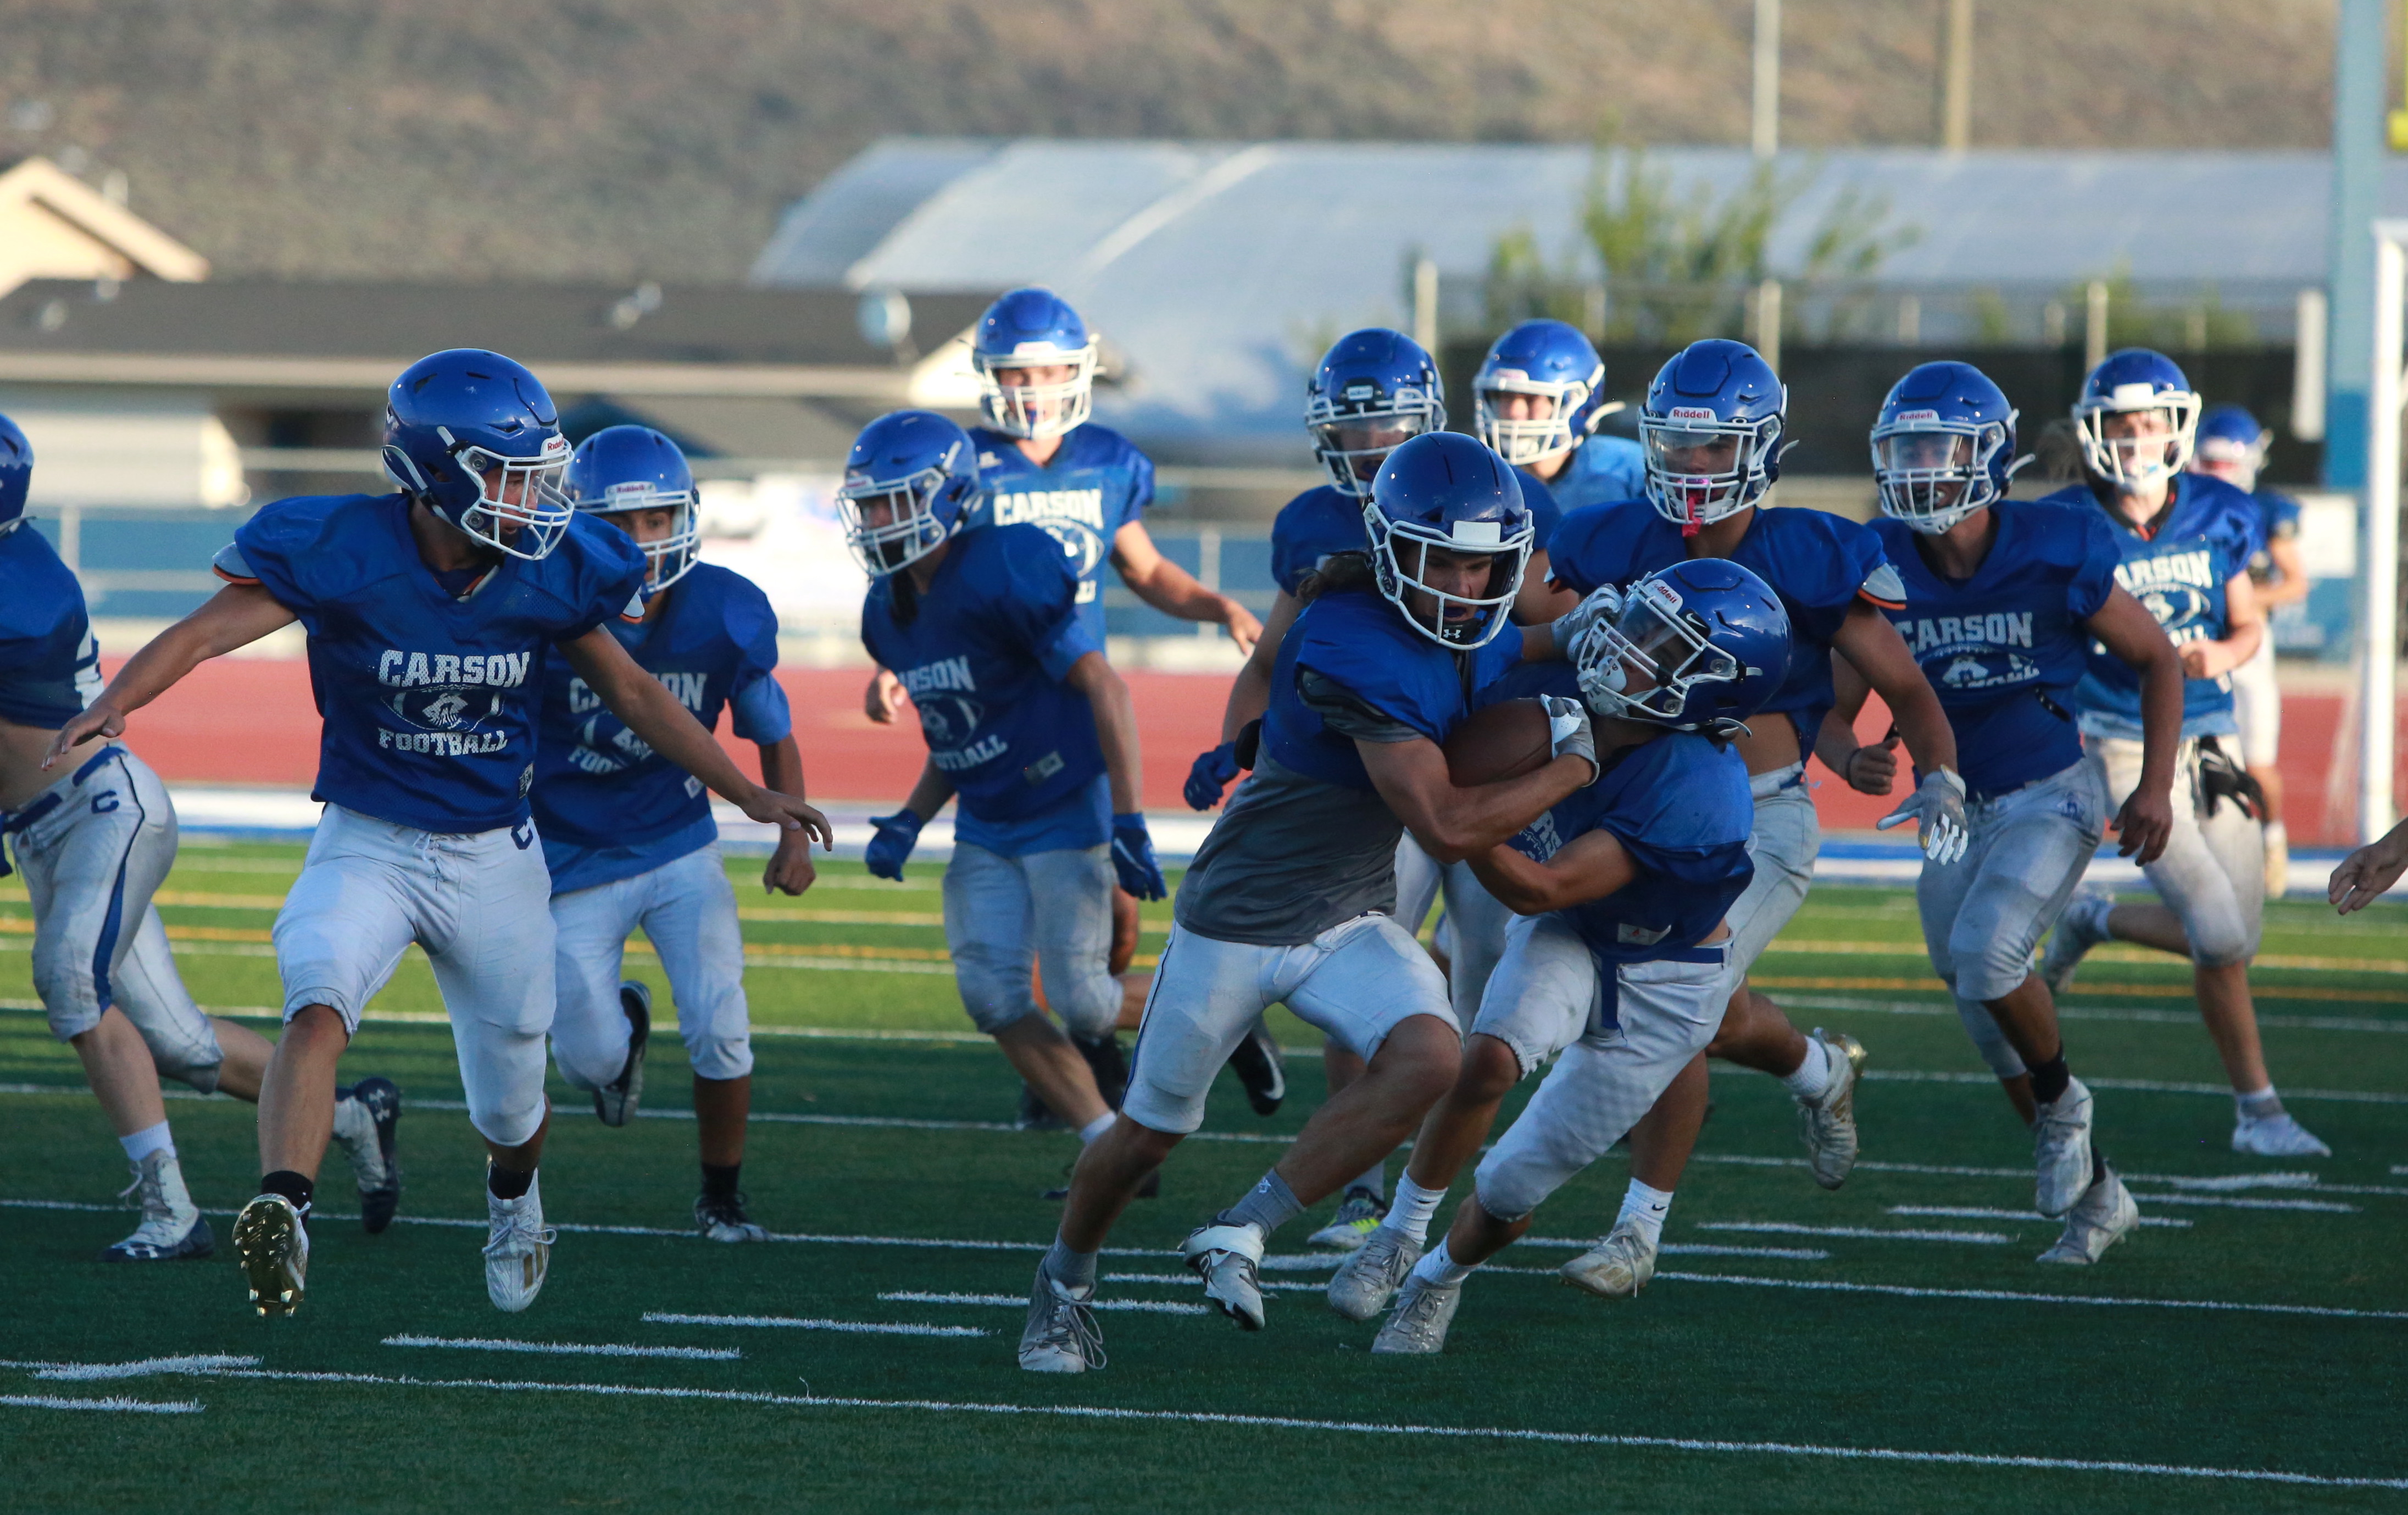 Carson High football eyes winning record, postseason | Serving Carson City for over 150 years